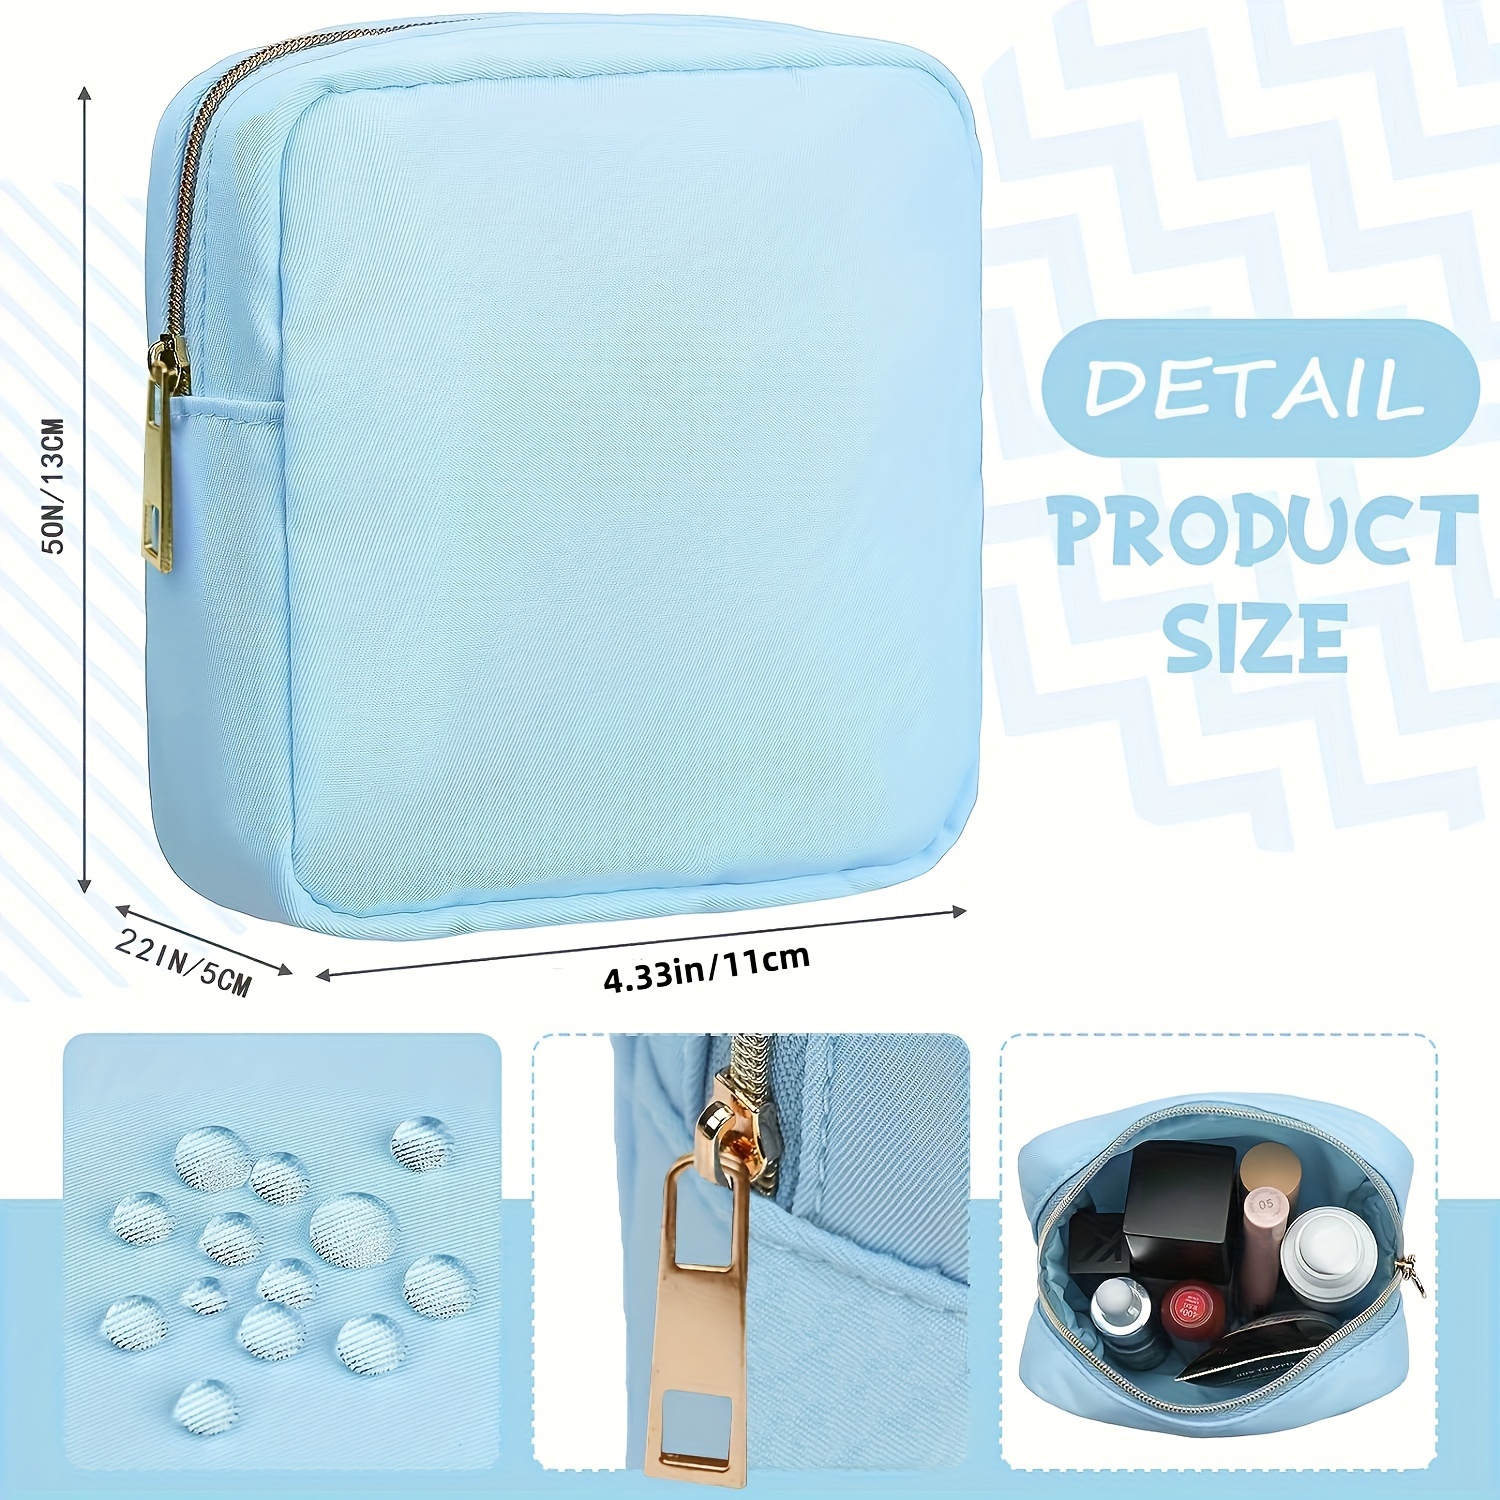  Waterproof Mini Makeup Bag Pouch for Purse,Small Cosmetic  Travel Bag Pouch Nylon Toiletry Organizers Bag for Women Girls,Cute Mini  Zipper Pouch Preppy Coin Purse for School Work(Mini-Chocolate) : Beauty 